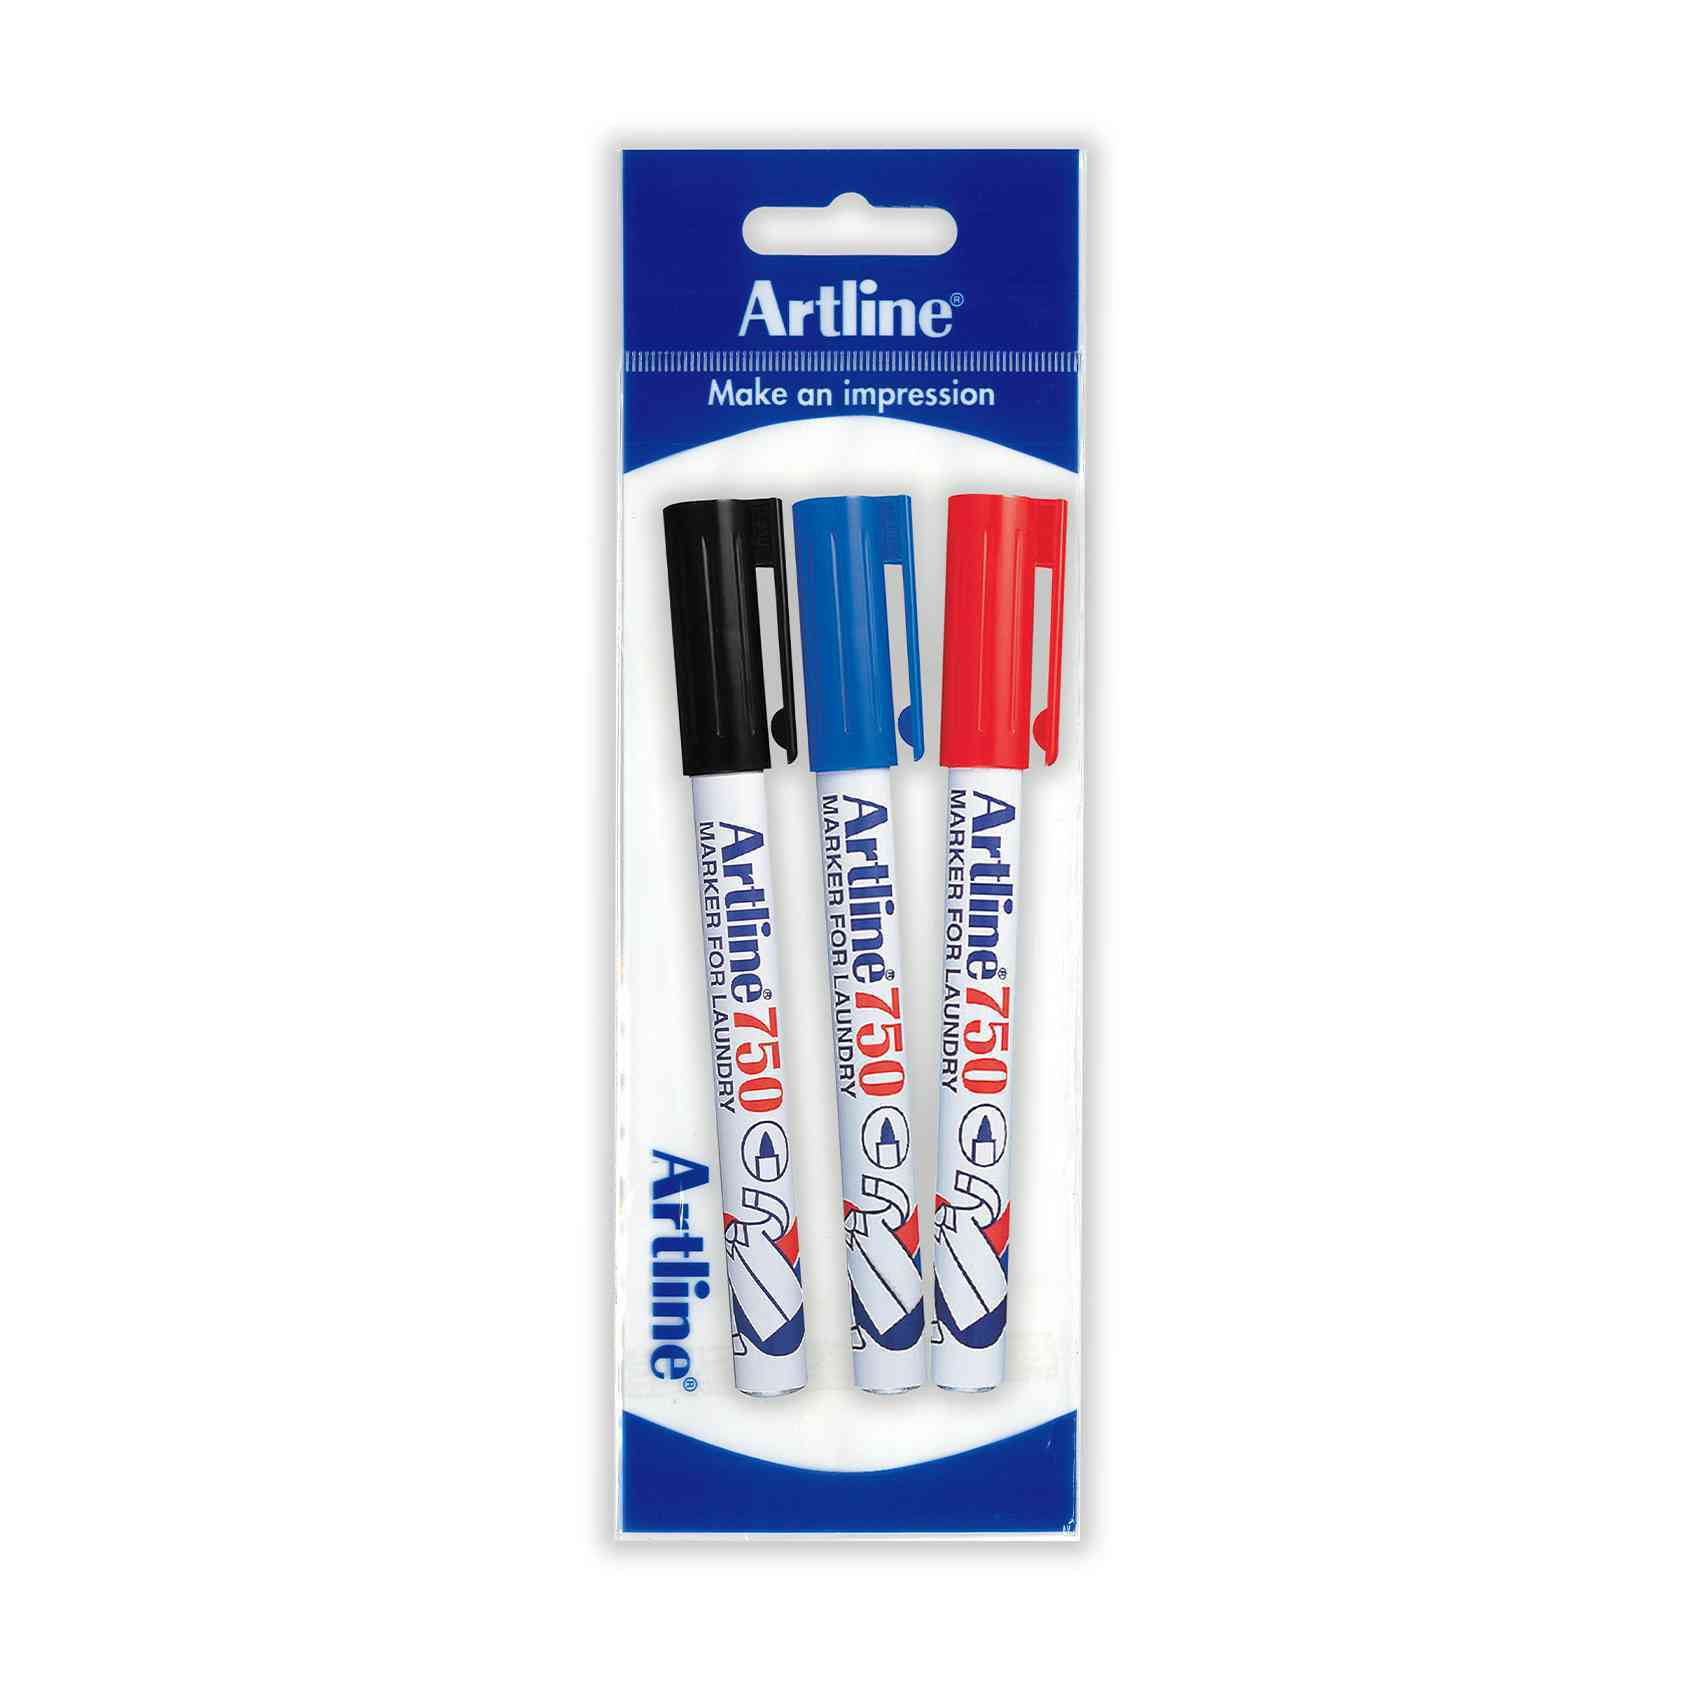 6 Pens Artline 750 Laundry Permanent Markers Perfect for Labelling